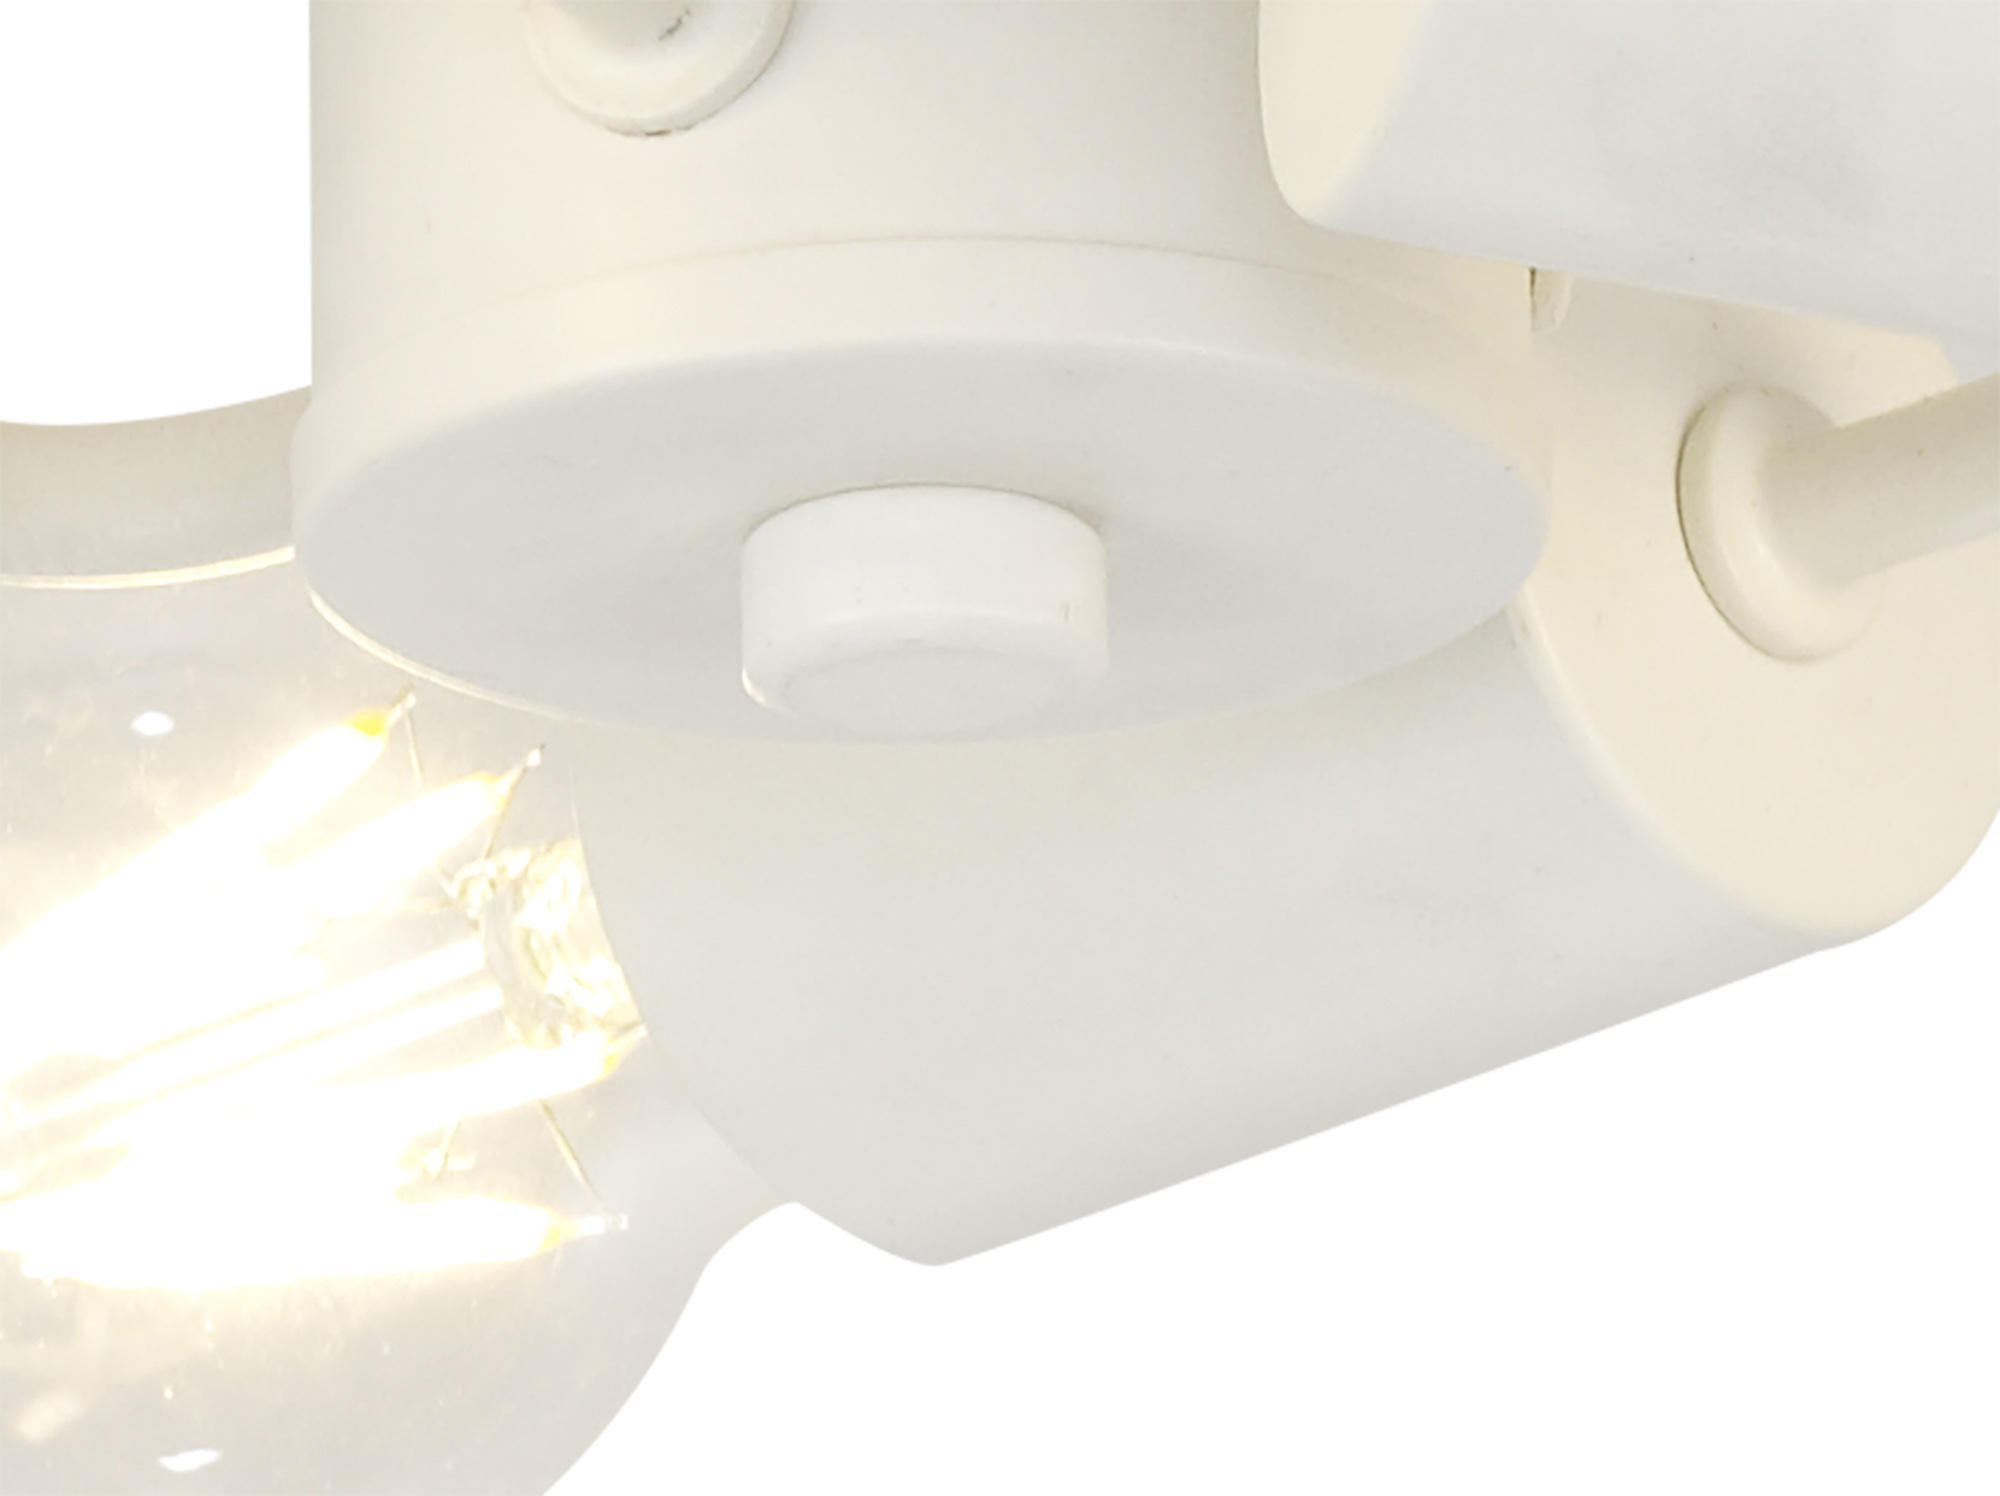 Baymont 40cm Flush 3 Light Ivory Pearl; Frosted Diffuser DK0610  Deco Baymont WH IV